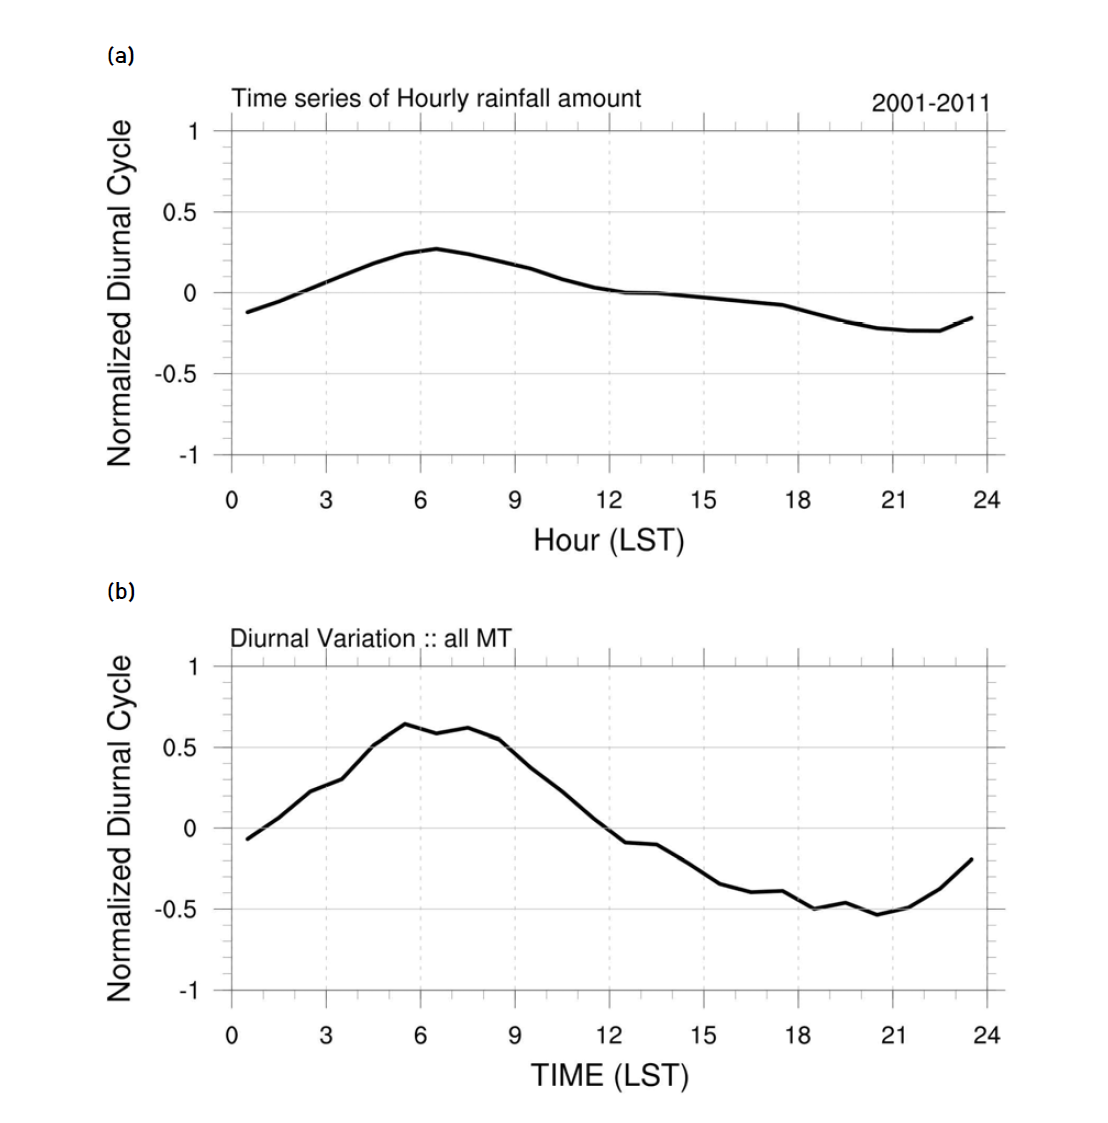 Normalized diurnal cycles of the hourly precipitation rate (mm h-1) (a) during 2001-2011, and (b) for the MT cases.